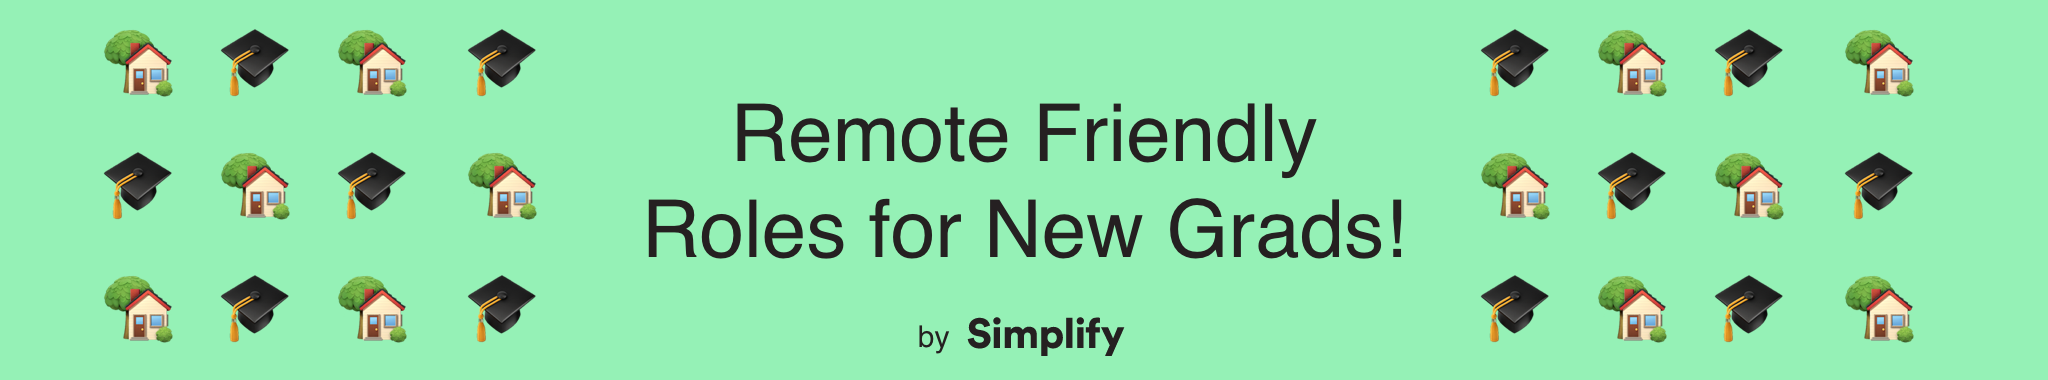 text that says “Remote Friendly Roles for New Grads! by Simplify” surrounded by graduation cap and house emojis